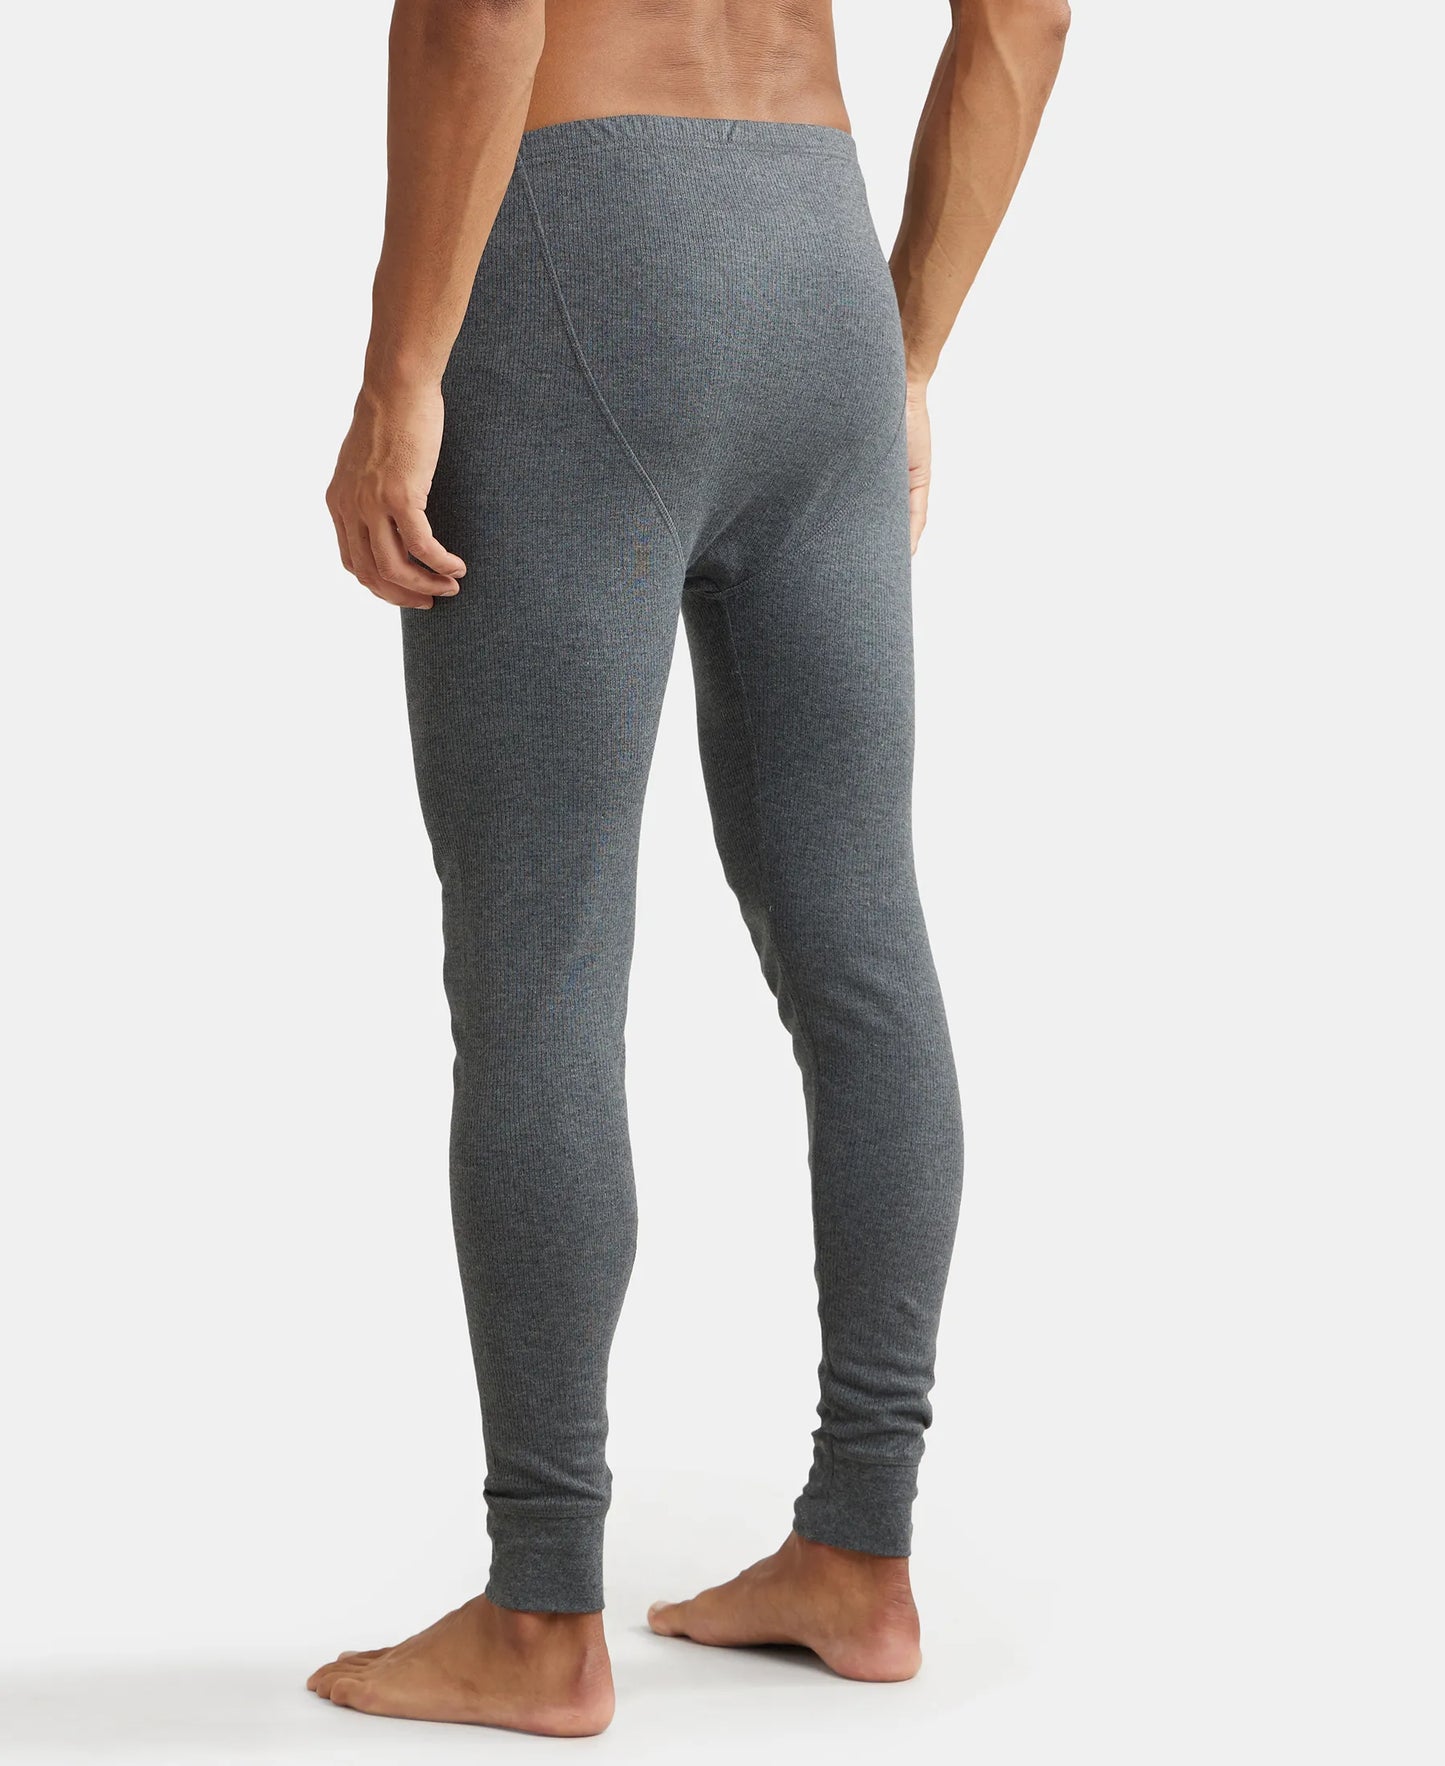 Super Combed Cotton Rich Thermal Long Johns with StayWarm Technology - Charcoal Melange-3